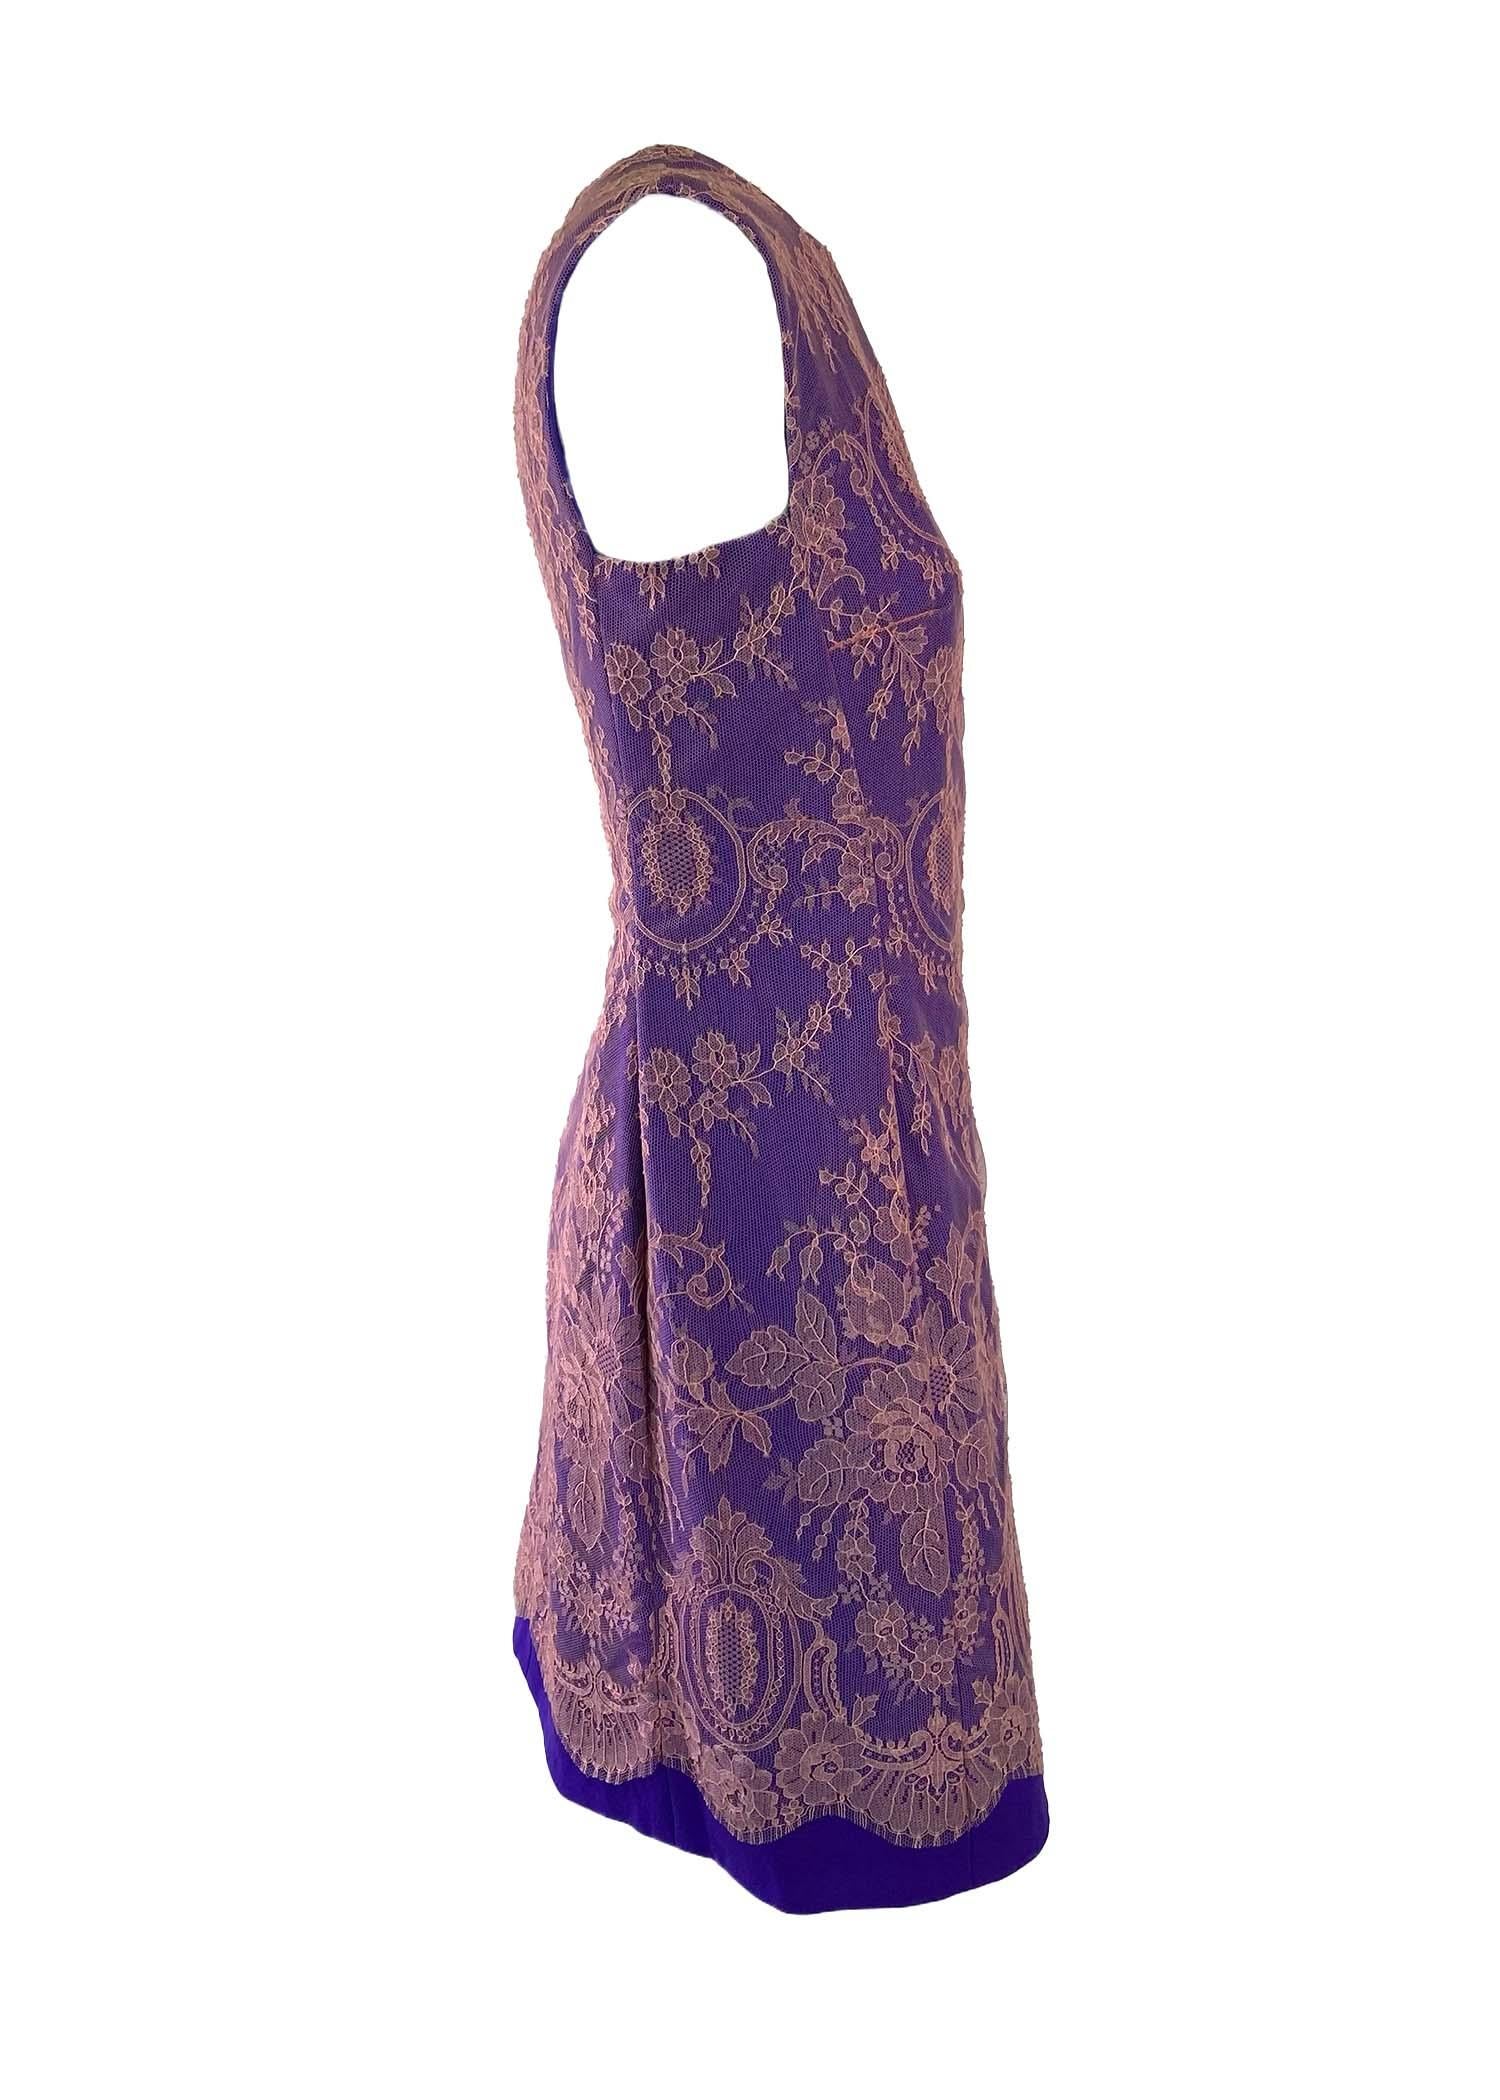 Women's F/W 1996 Gianni Versace Couture Pink Lace Overlay Purple Mini Dress For Sale